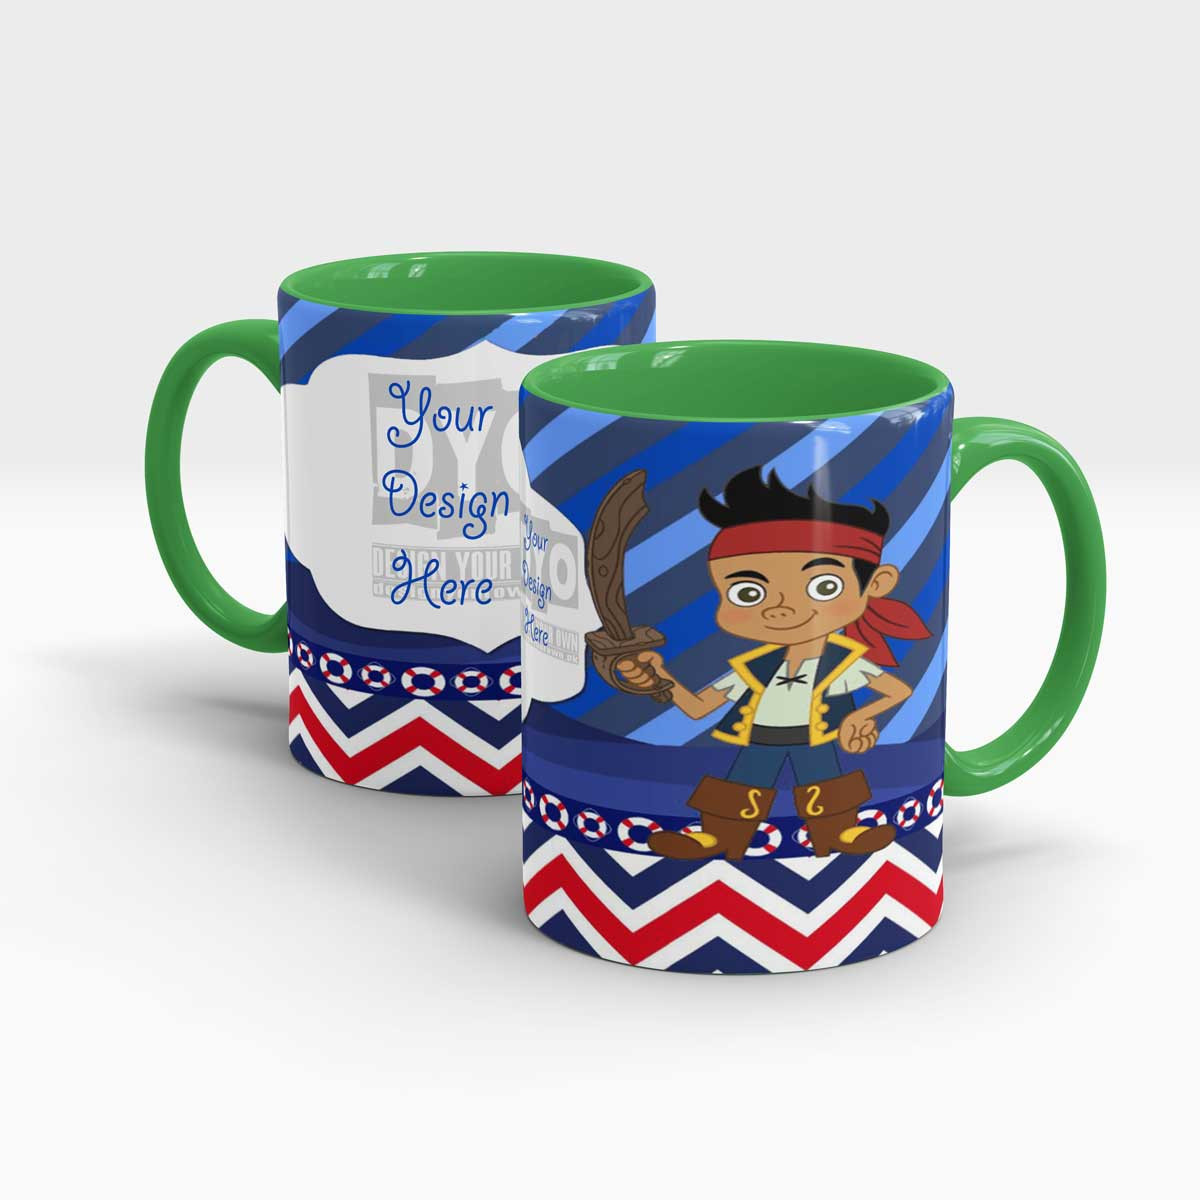 Hunting Gifts For Kids
 Treasure Hunt Personalized Gift Mug for Kids Design Your Own